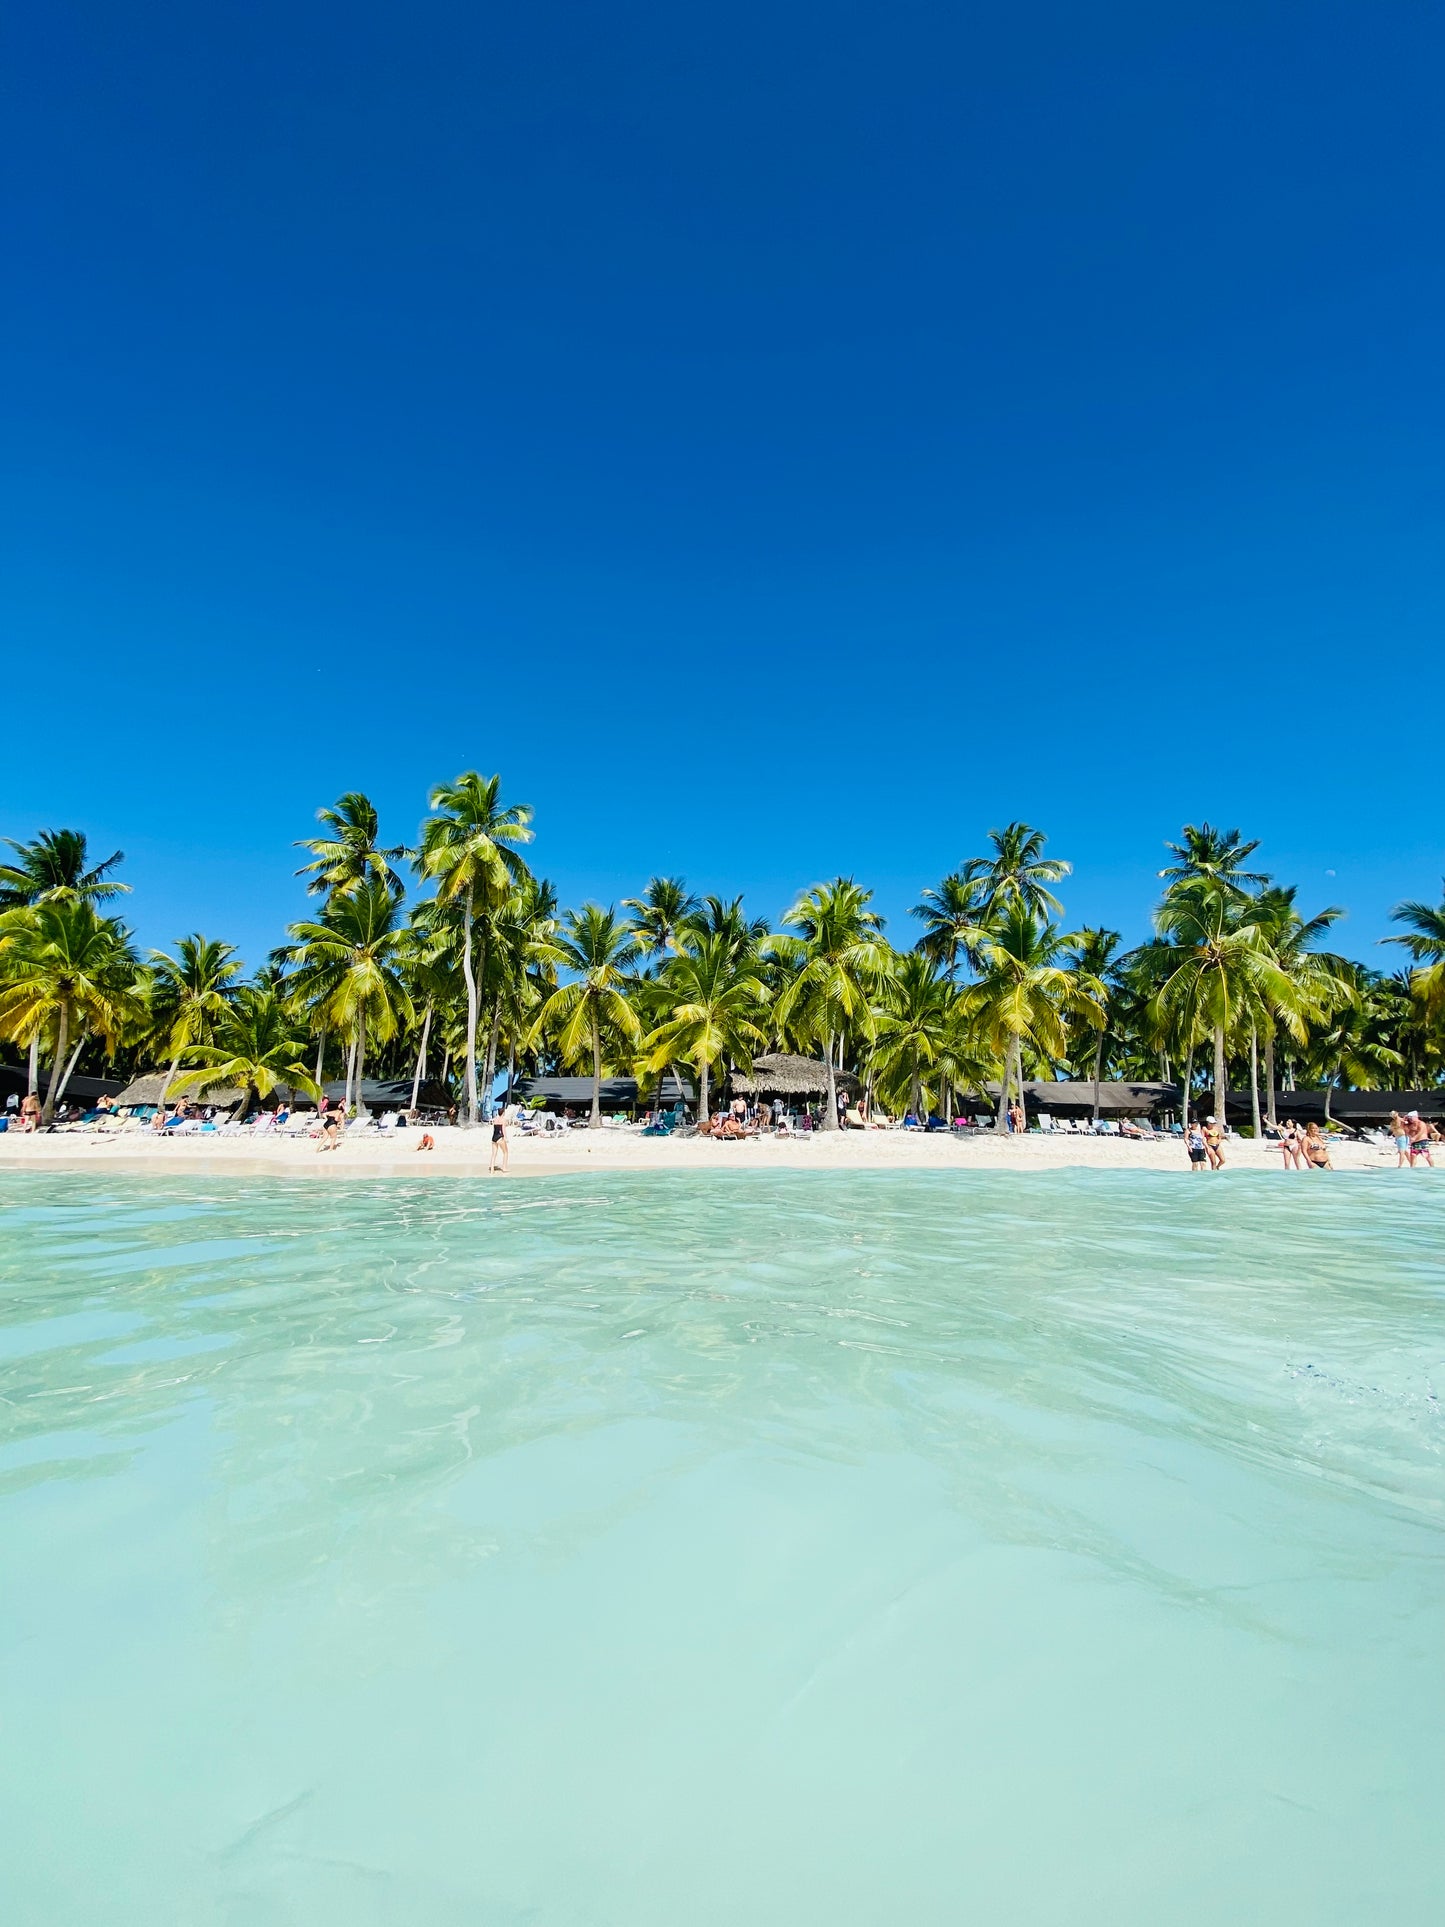 10-DAY ROAD TRIP IN THE DOMINICAN REPUBLIC